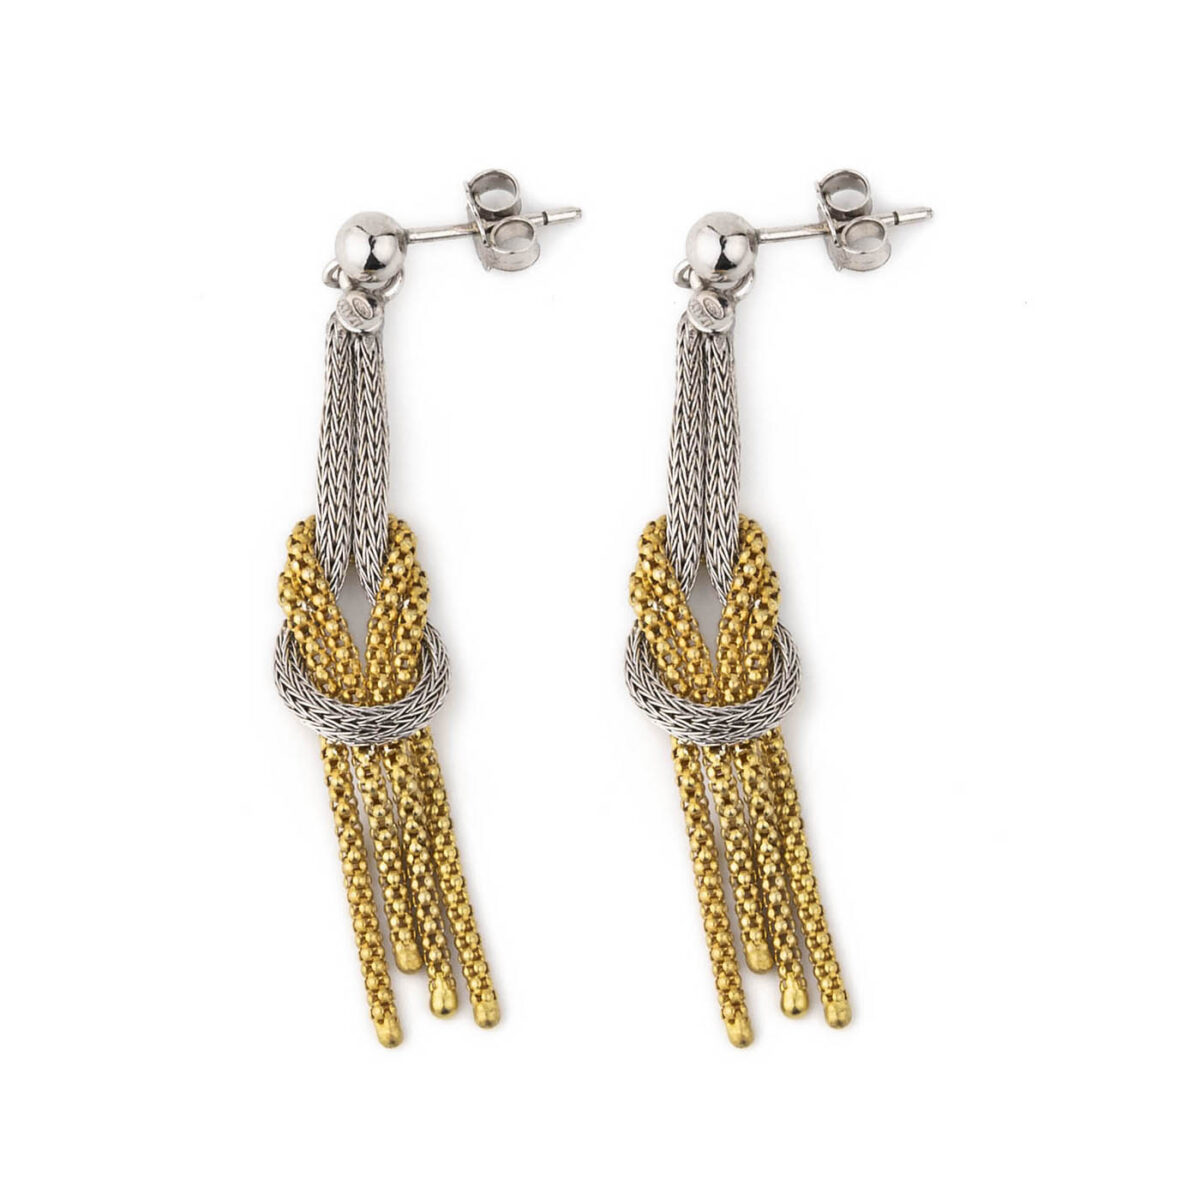 Knot Earrings - Gold Plated Silver 925